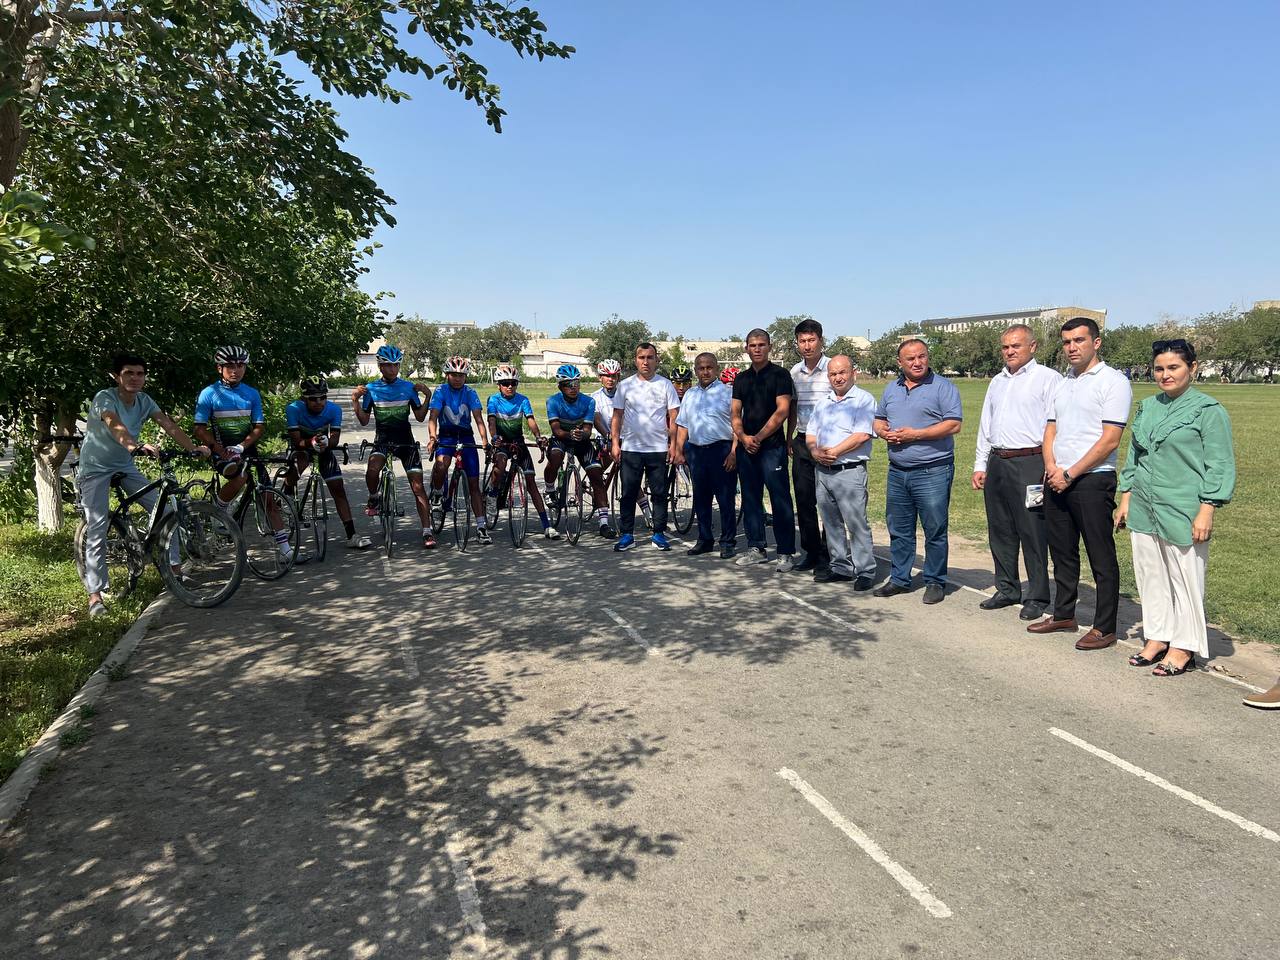 The Student League cycling competition was held